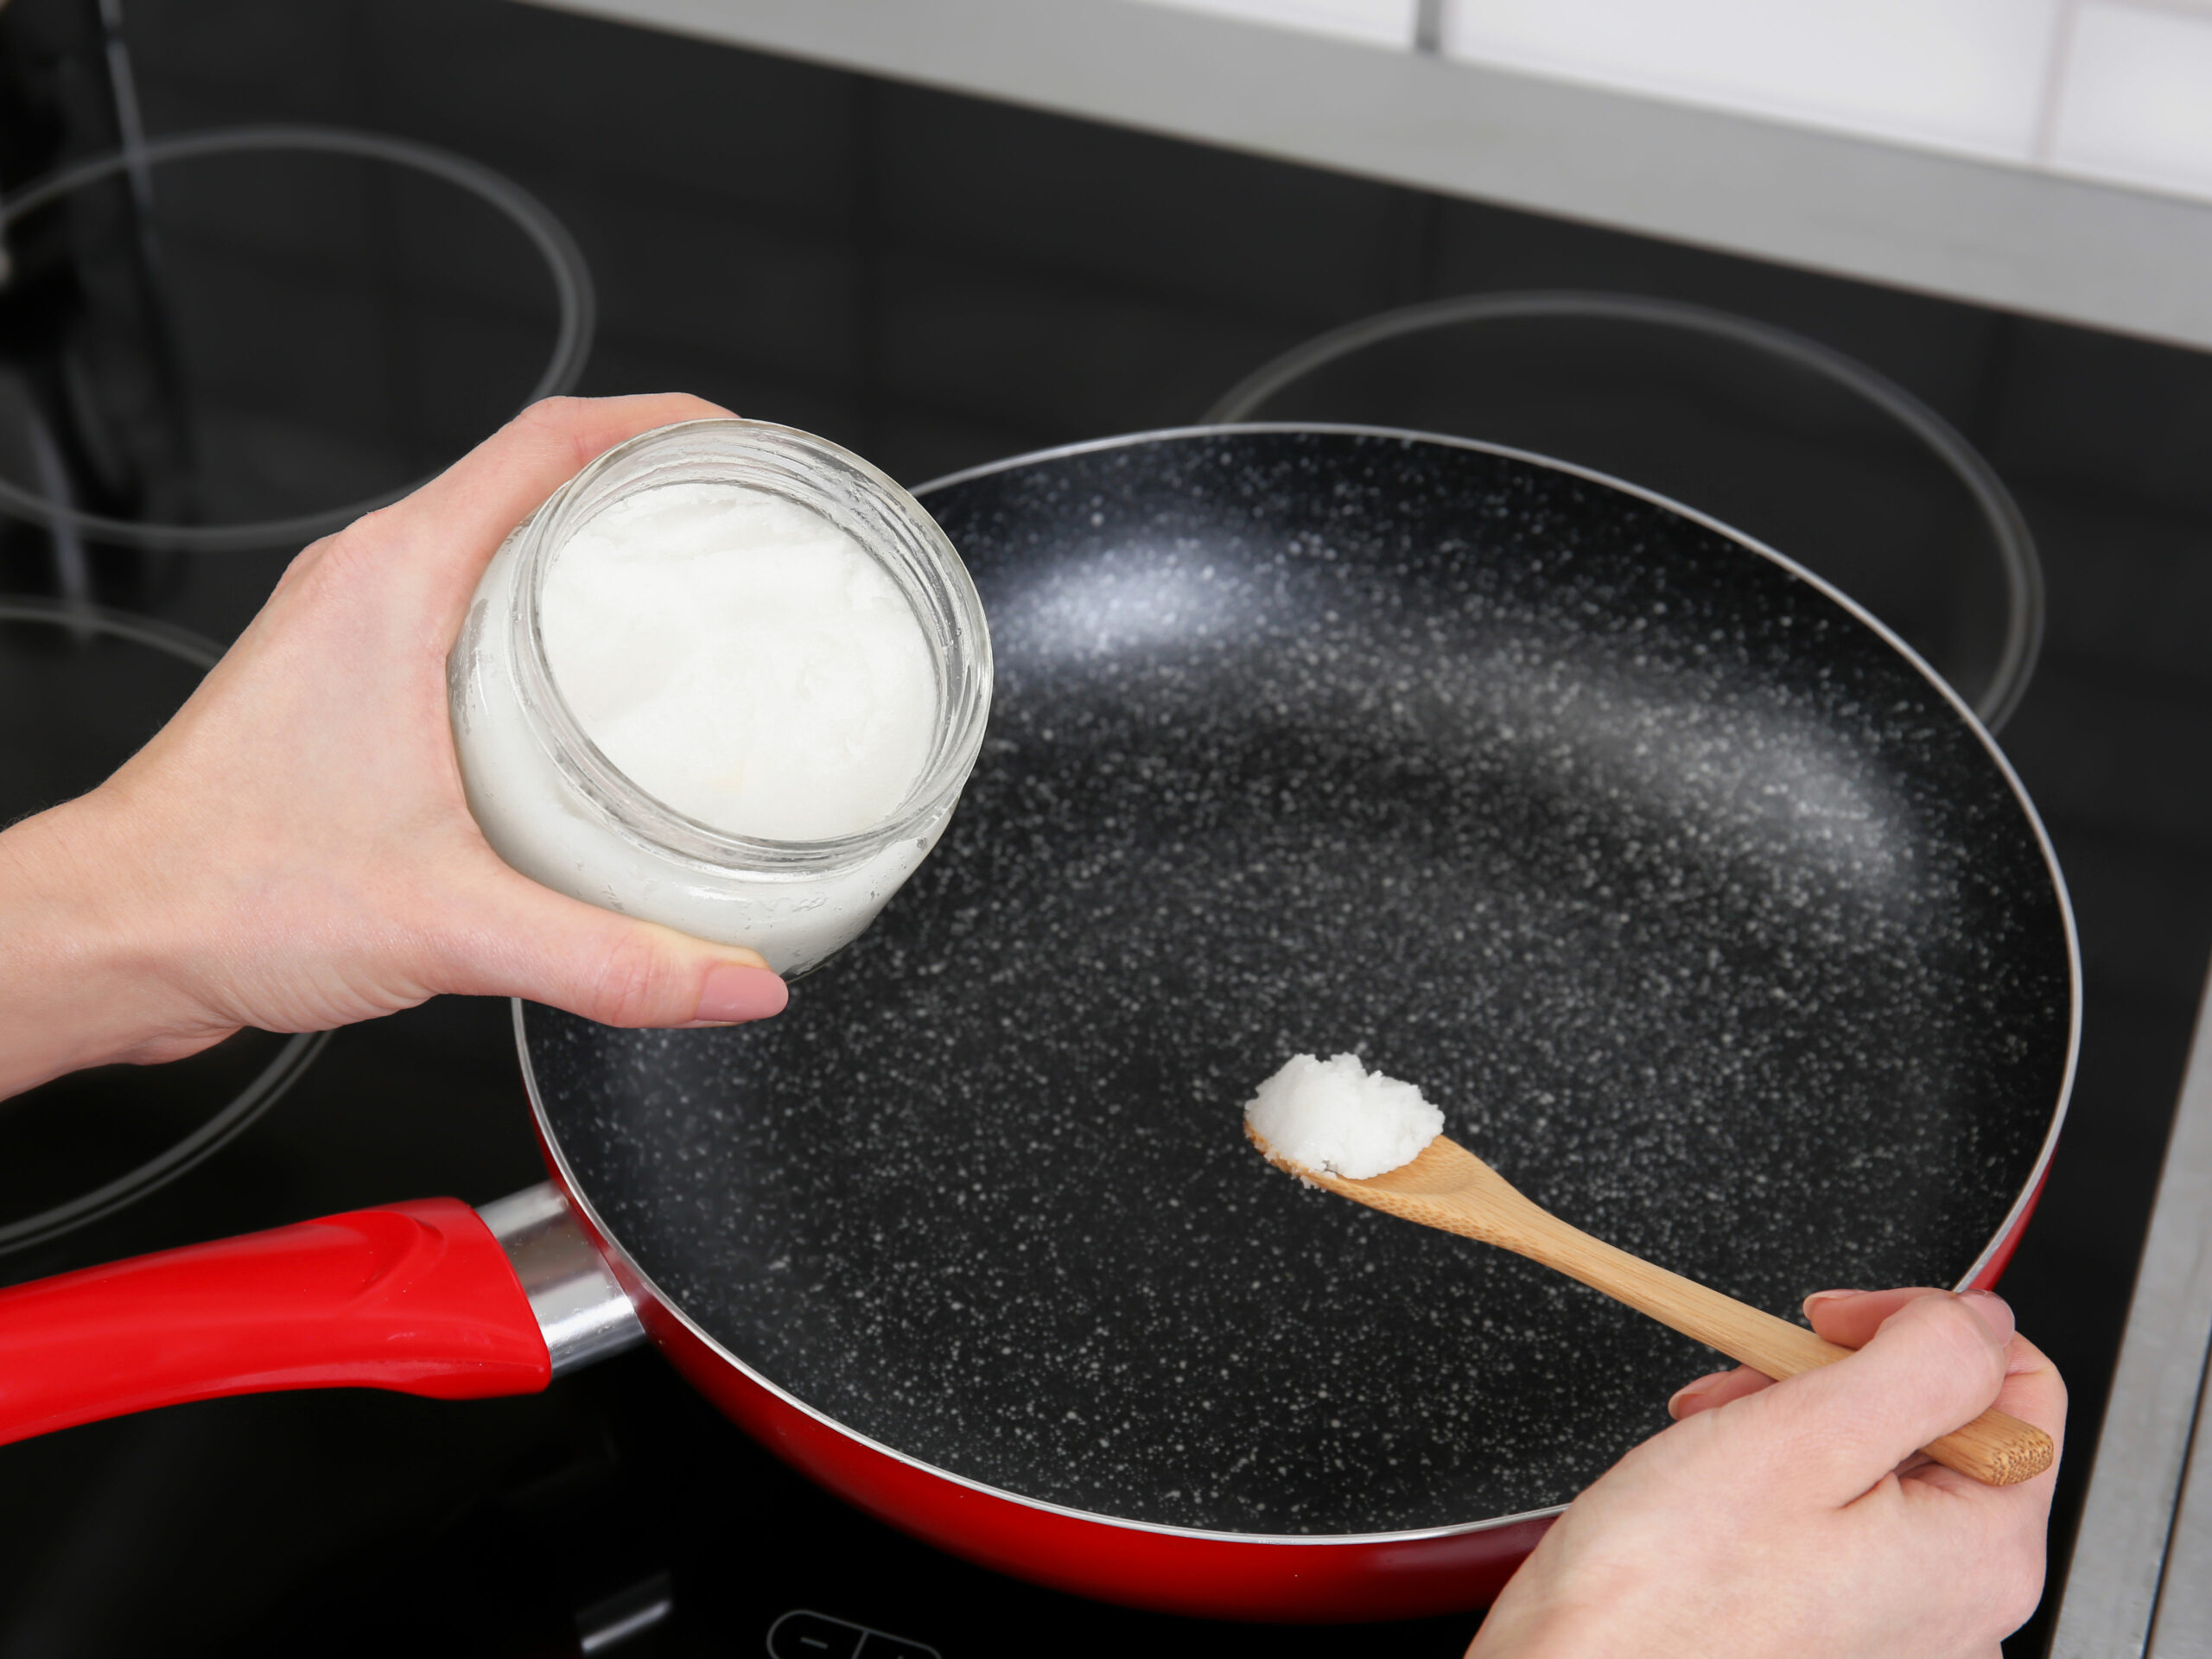 coconut oil being used in cooking